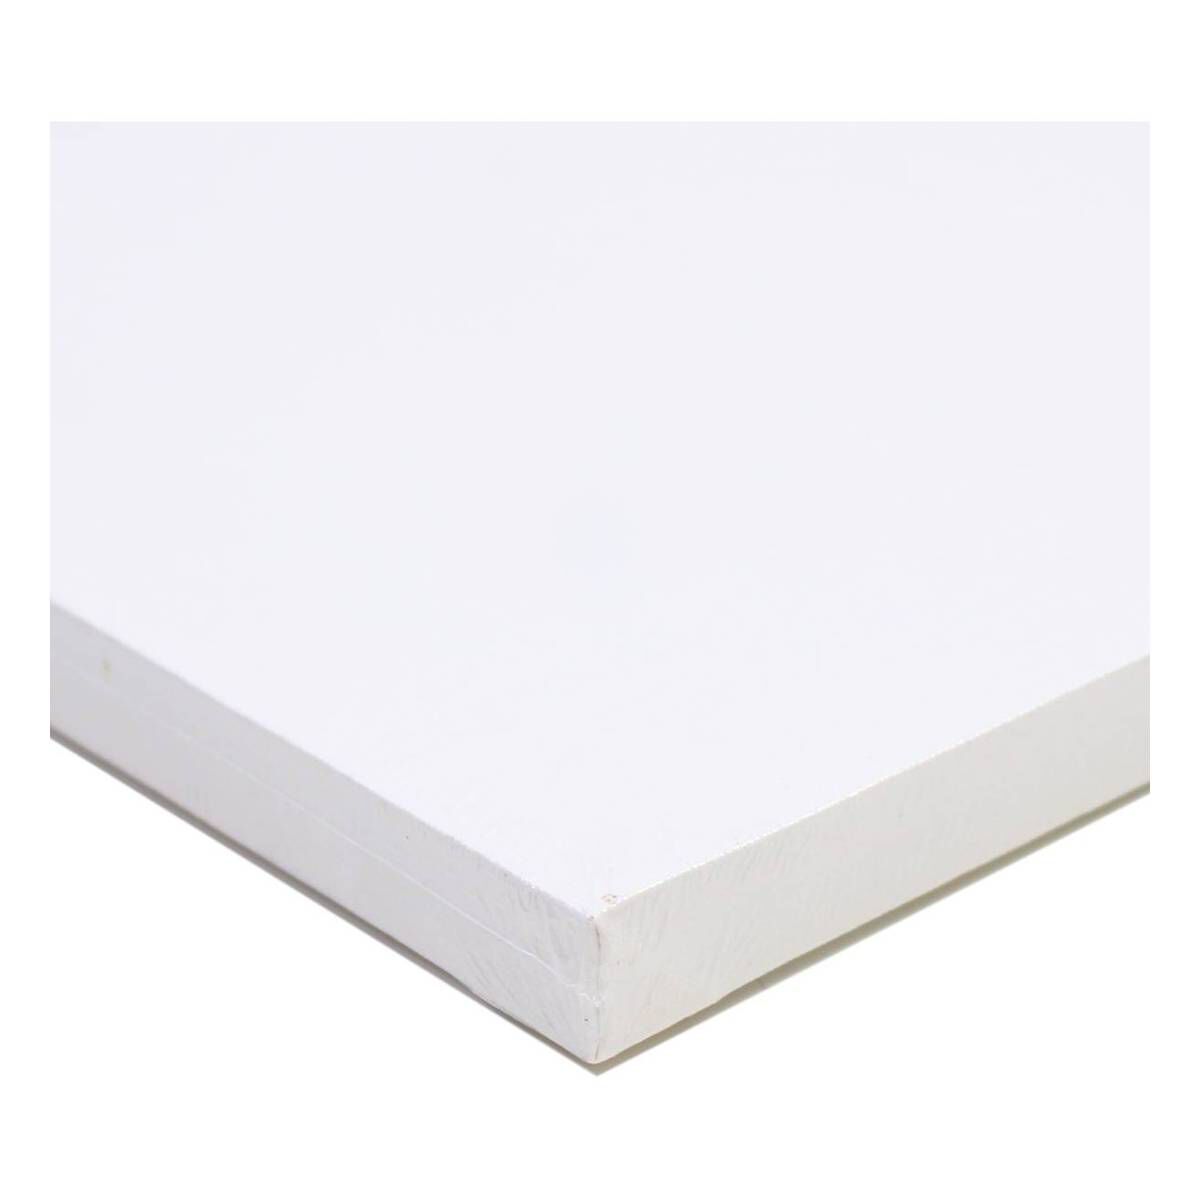 White Stretched Canvas A4 | Hobbycraft